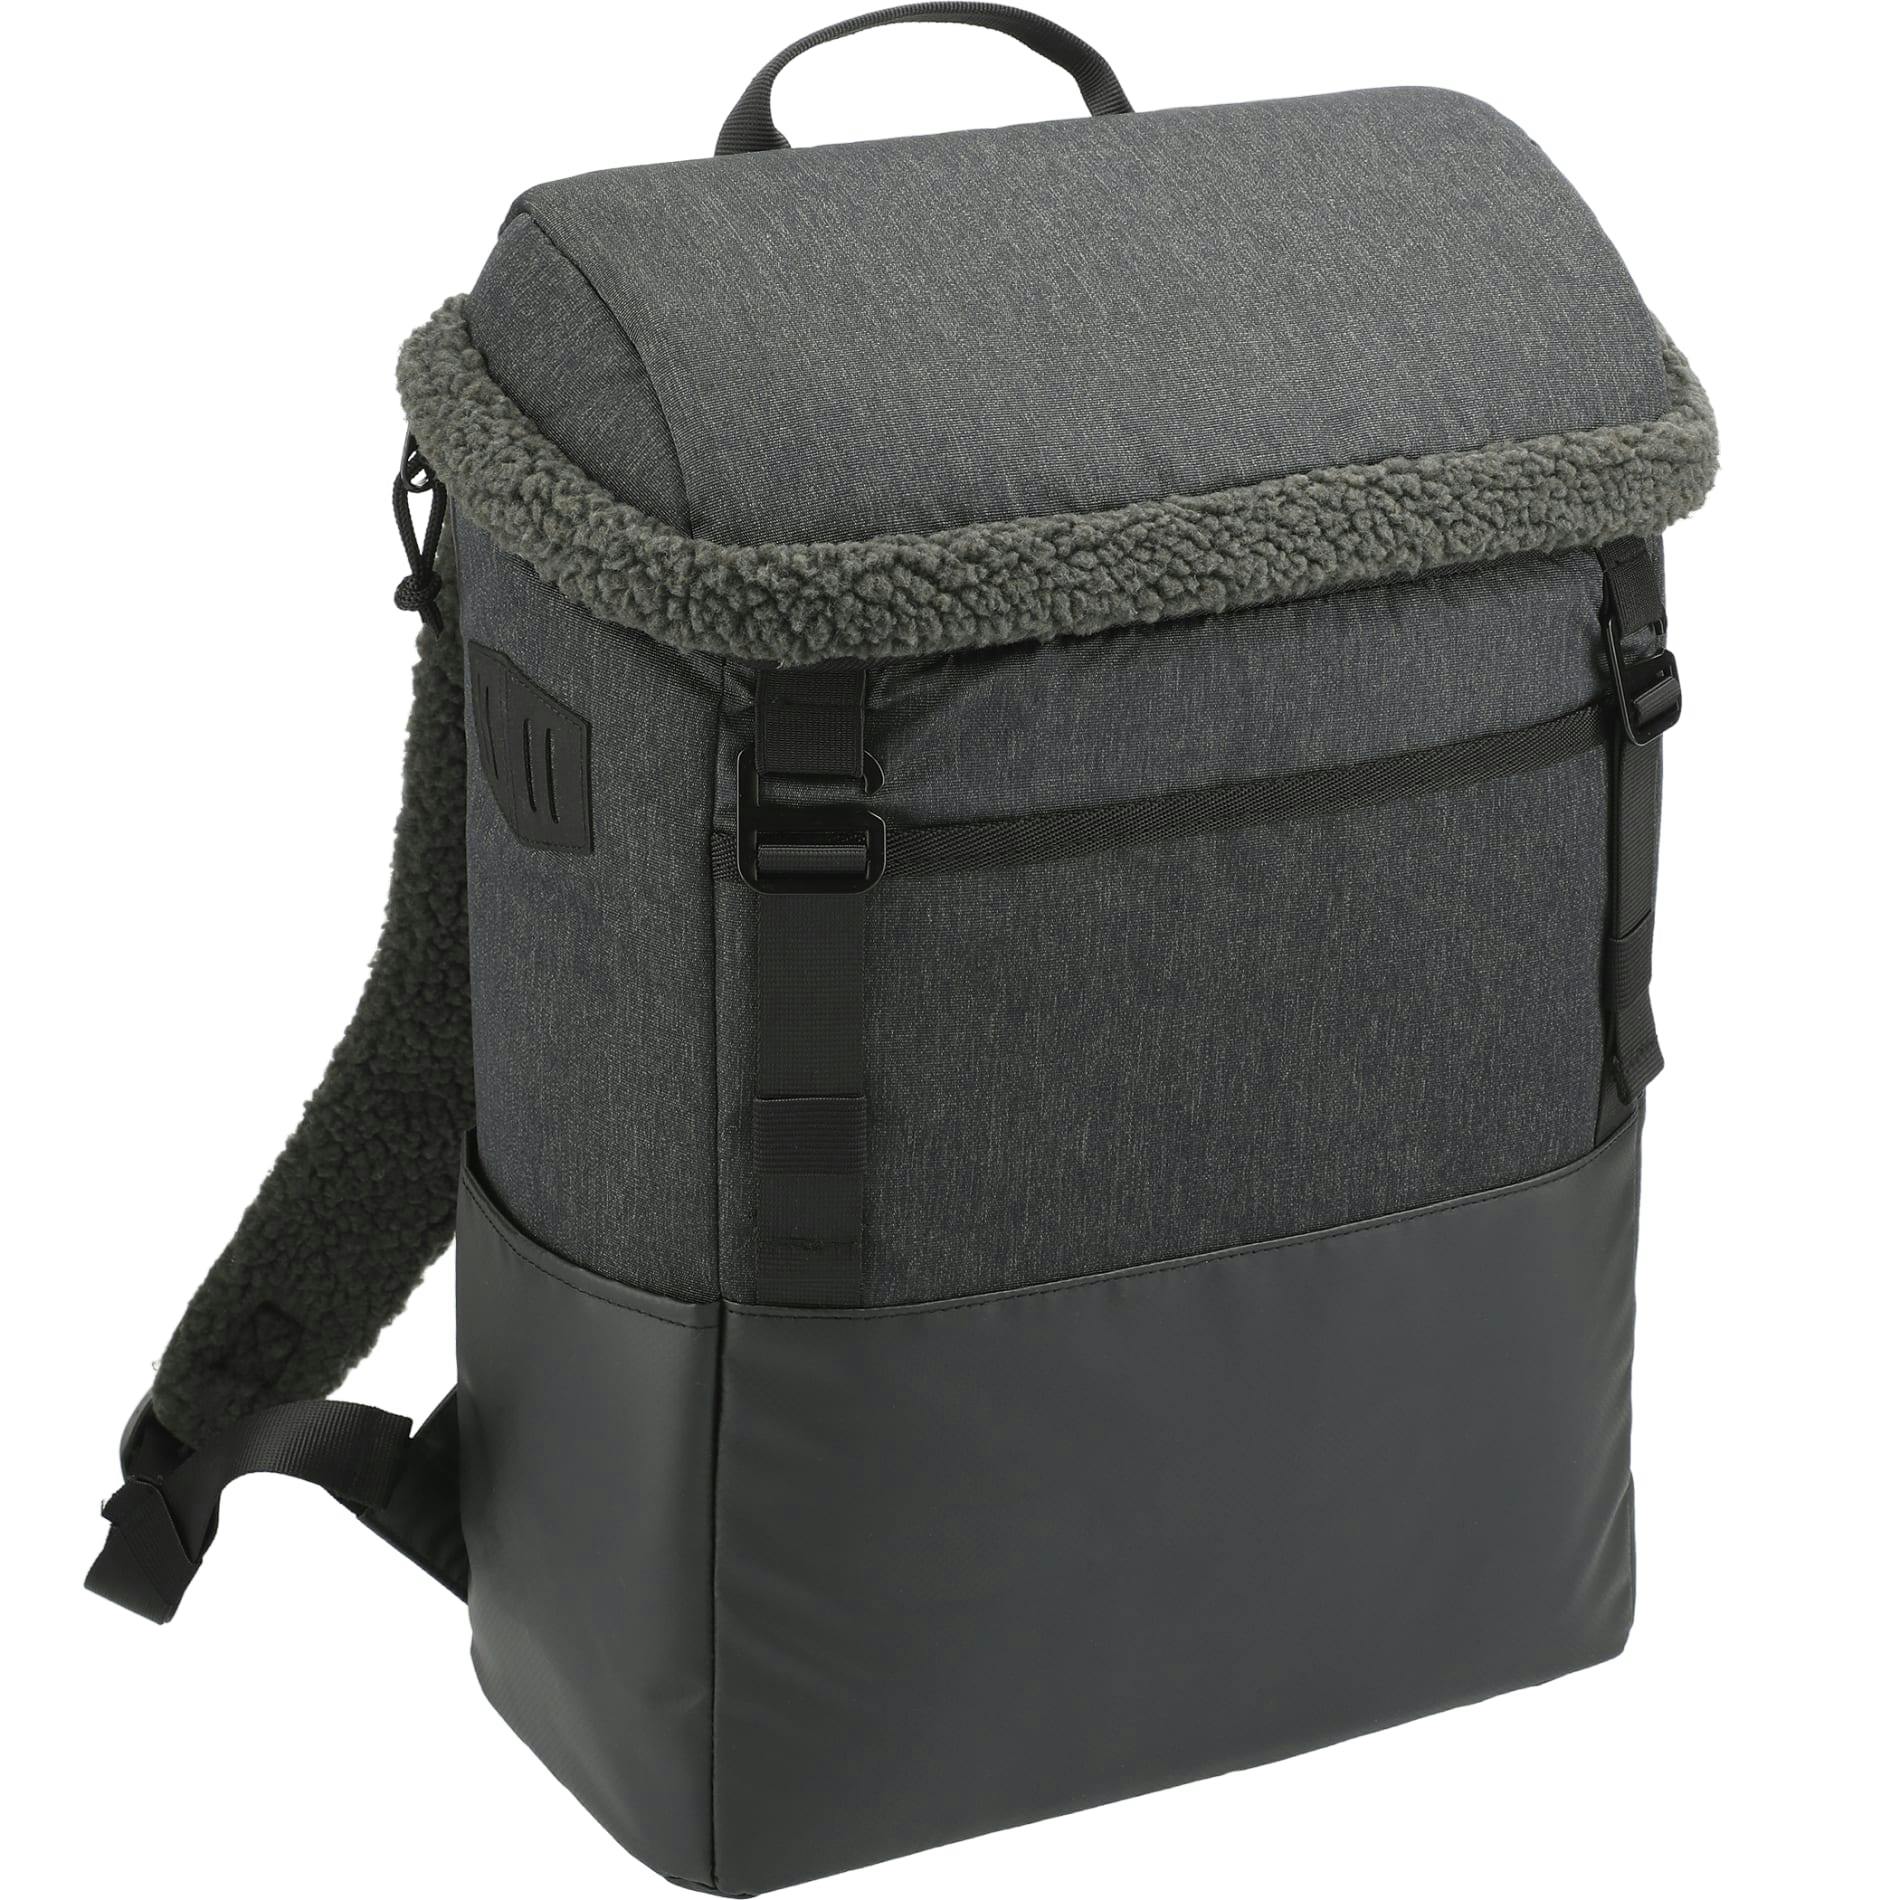 Field & Co. Fireside Eco 12 Can Backpack Cooler - additional Image 7